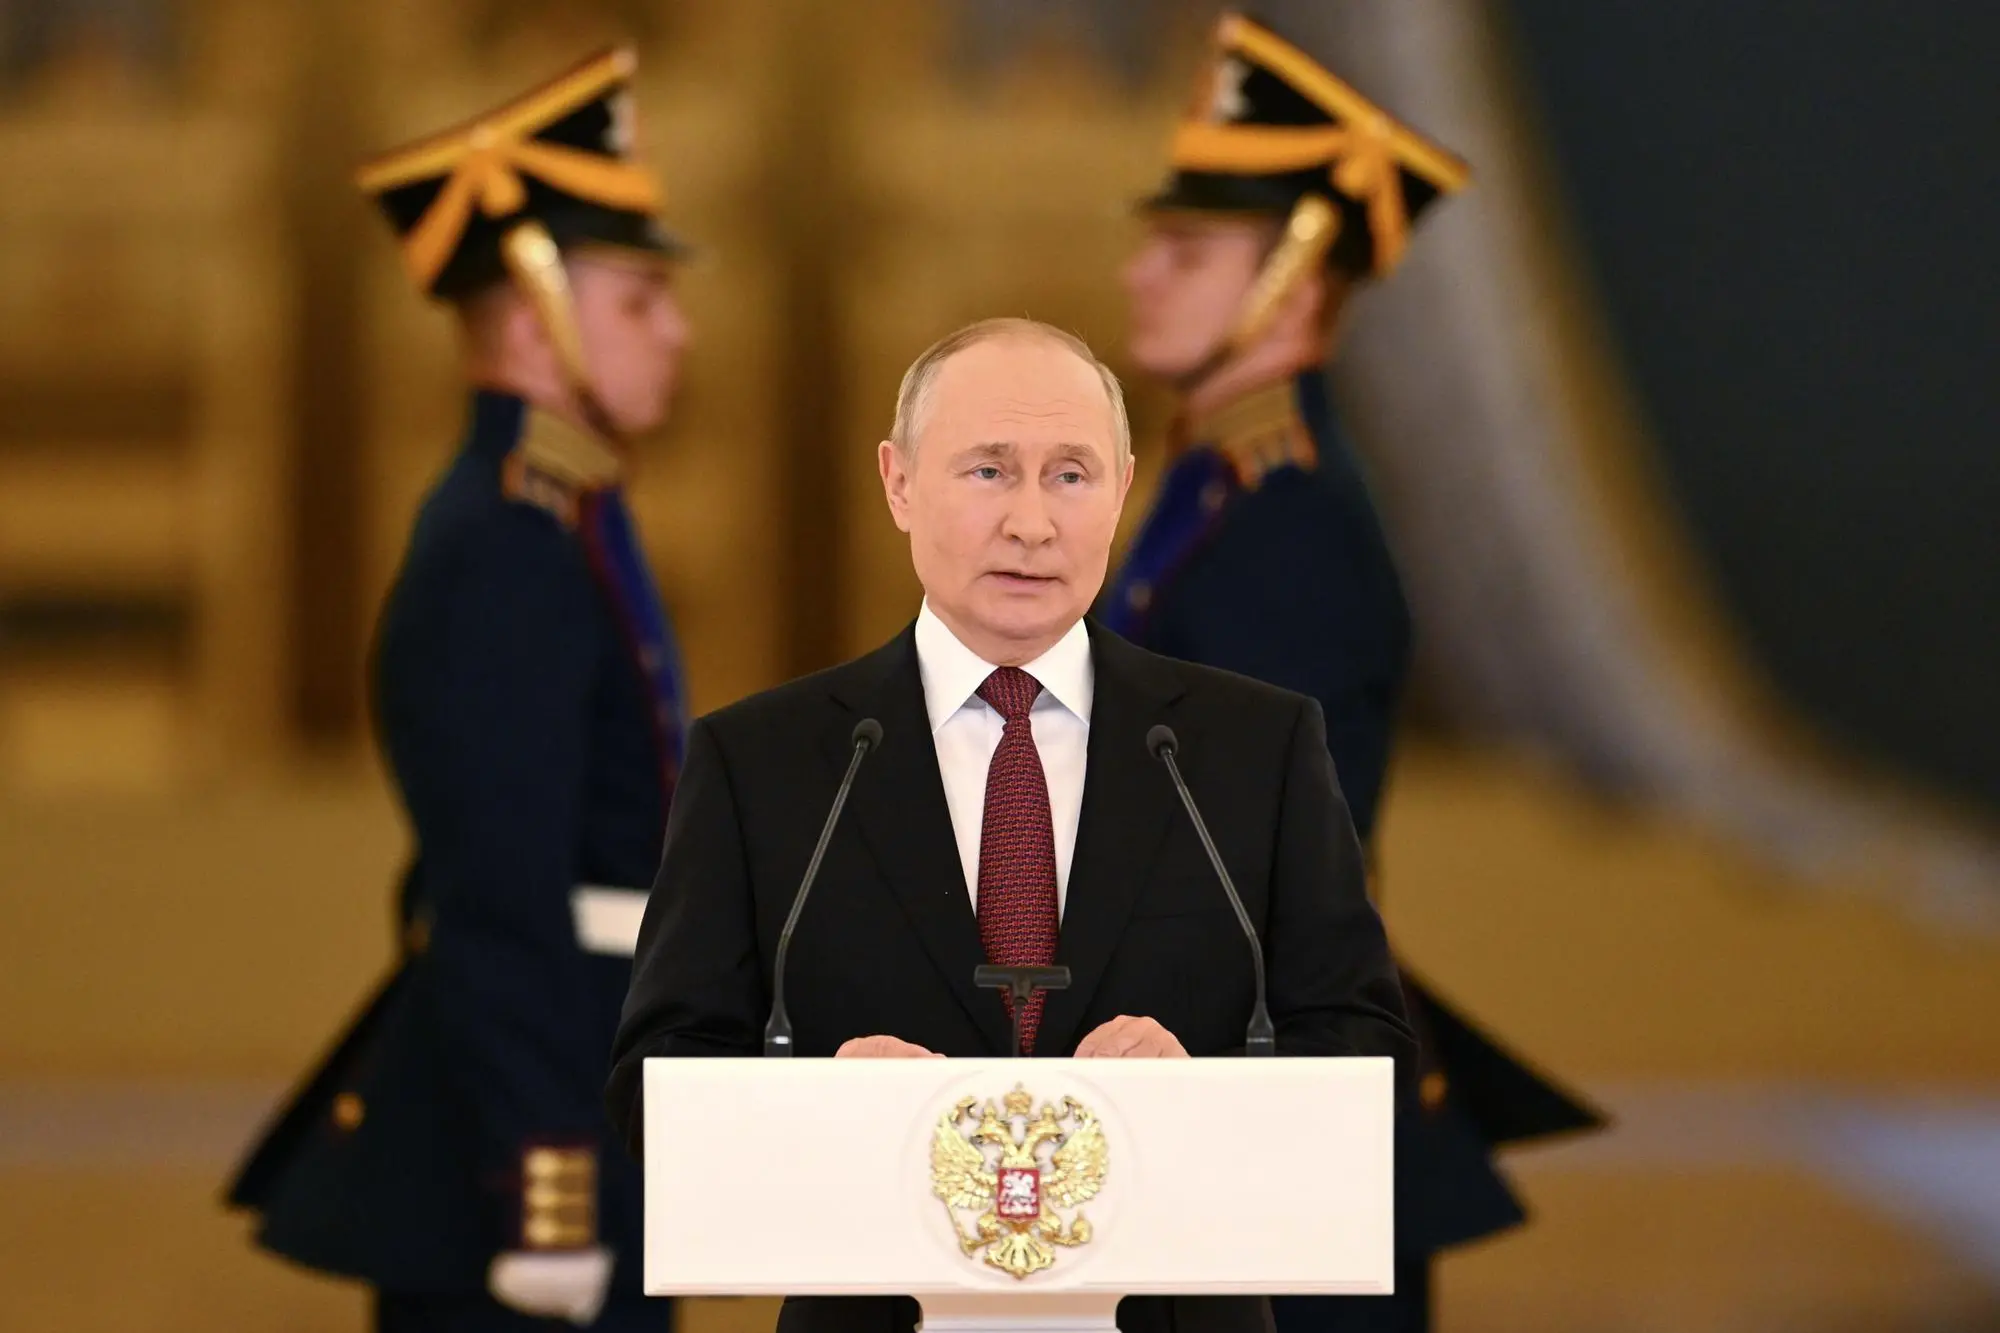 Russian President Vladimir Putin speaks during a ceremony to receive credentials from foreign ambassadors at the Kremlin's Alexander Hall in Moscow, Russia, 20 September 2022. ANSA/PAVEL BEDNYAKOV/SPUTNIK/KREMLIN POOL MANDATORY CREDIT